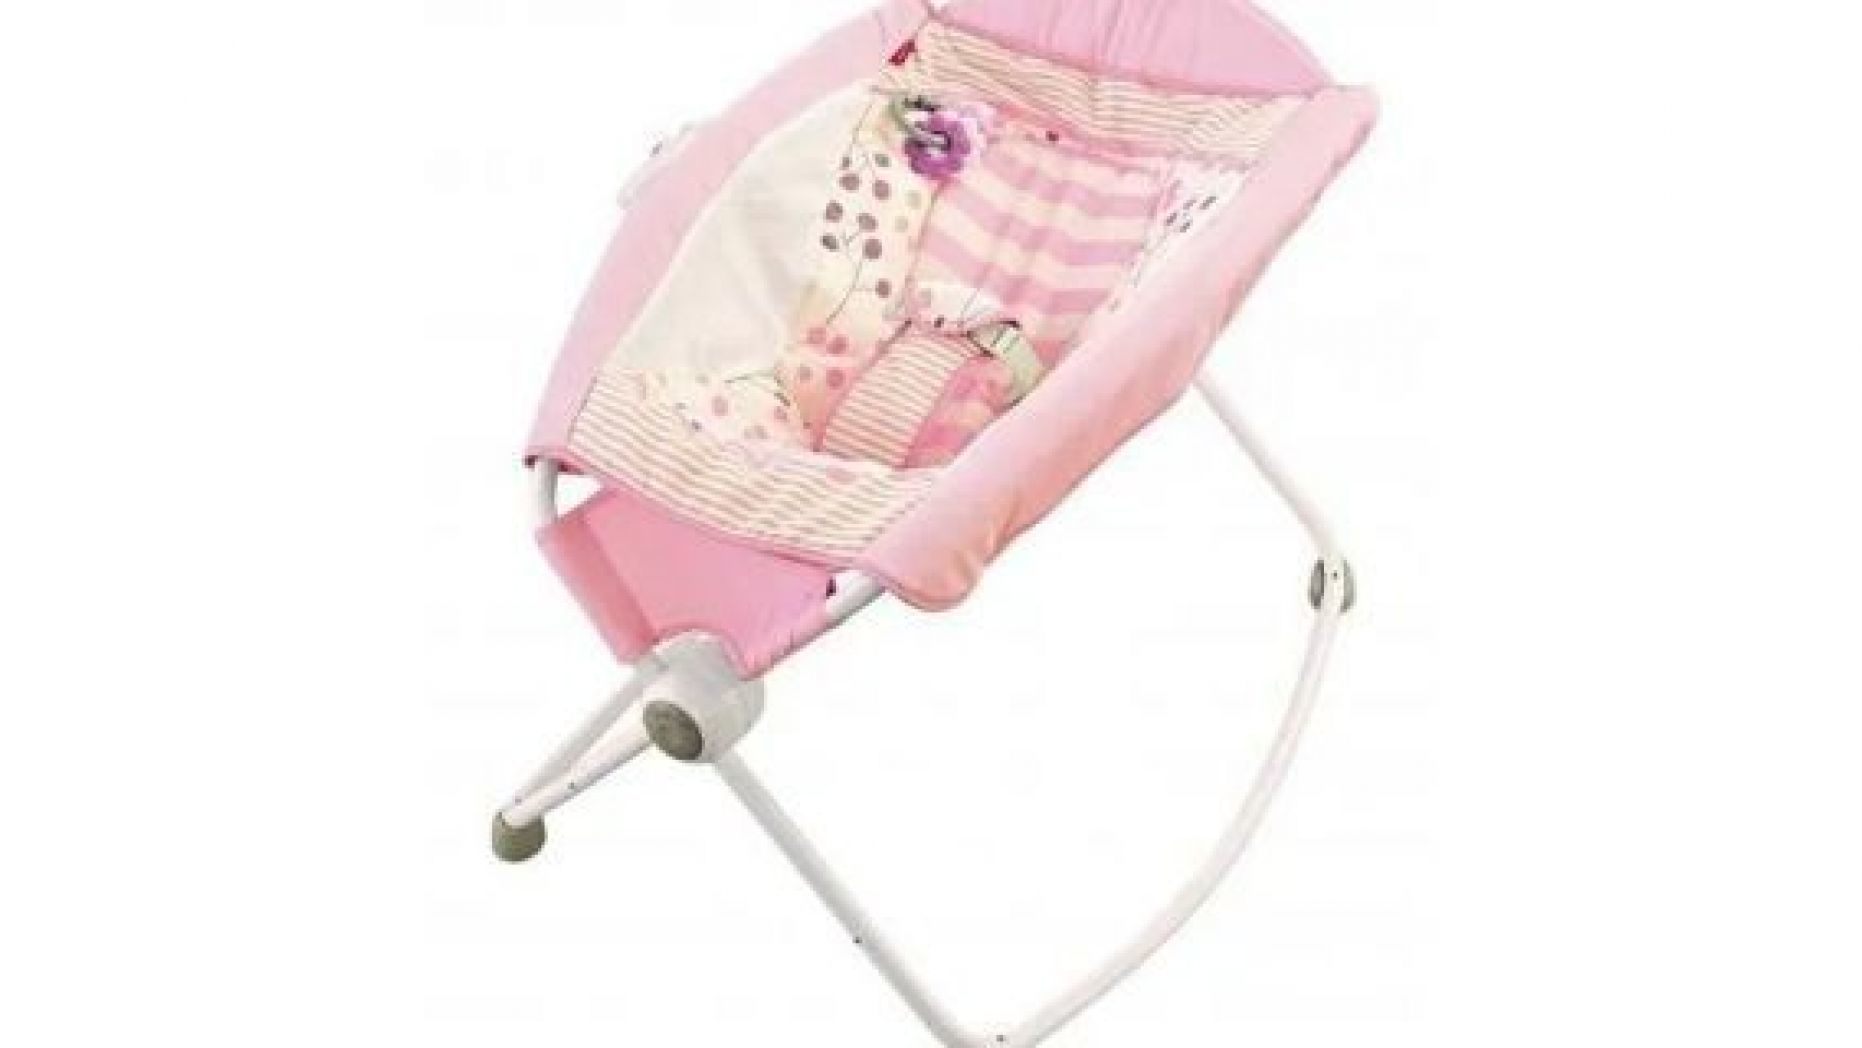 The U.S. Consumer Product Safety Commission (CPSC) officially recalled 4.7 million Fisher-Price “Rock 'n Play Sleepers” Tuesday after reports of at least 30 infant deaths related to using the product. (CPSC)